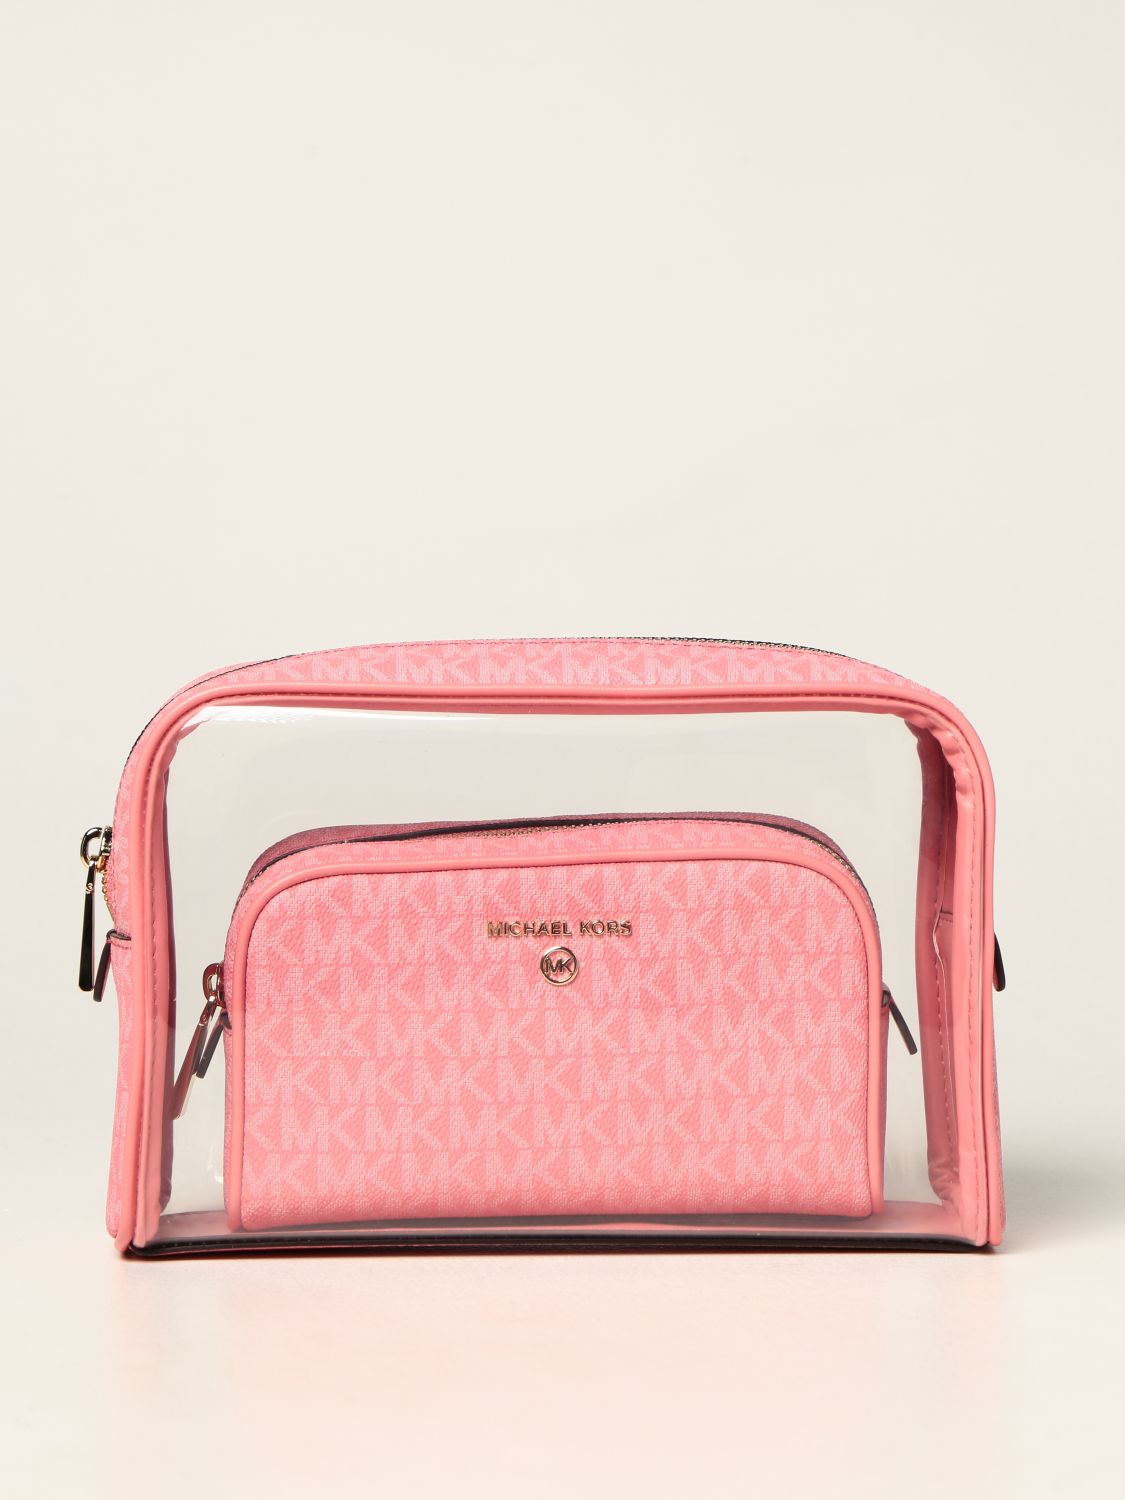 Michael Kors Accessories | Michael Kors Medium Zip Card Case on Chain | Color: Pink/White | Size: Os | Fashionstylestd's Closet